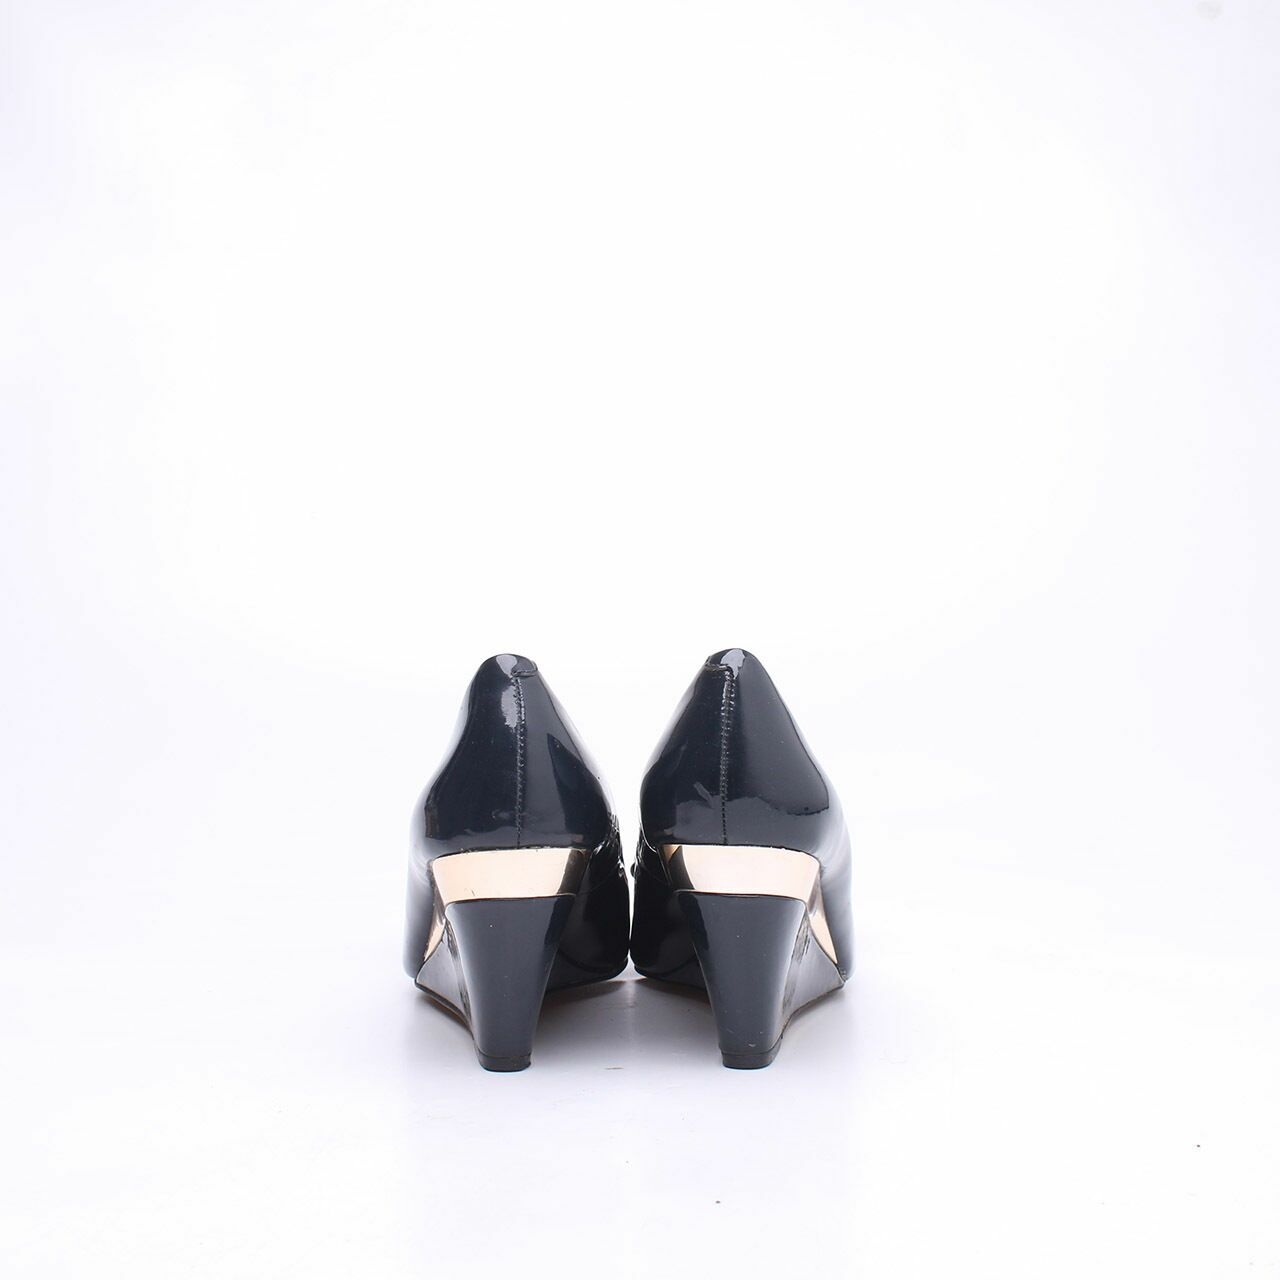 Vince Camuto Black Open Toe Wedges